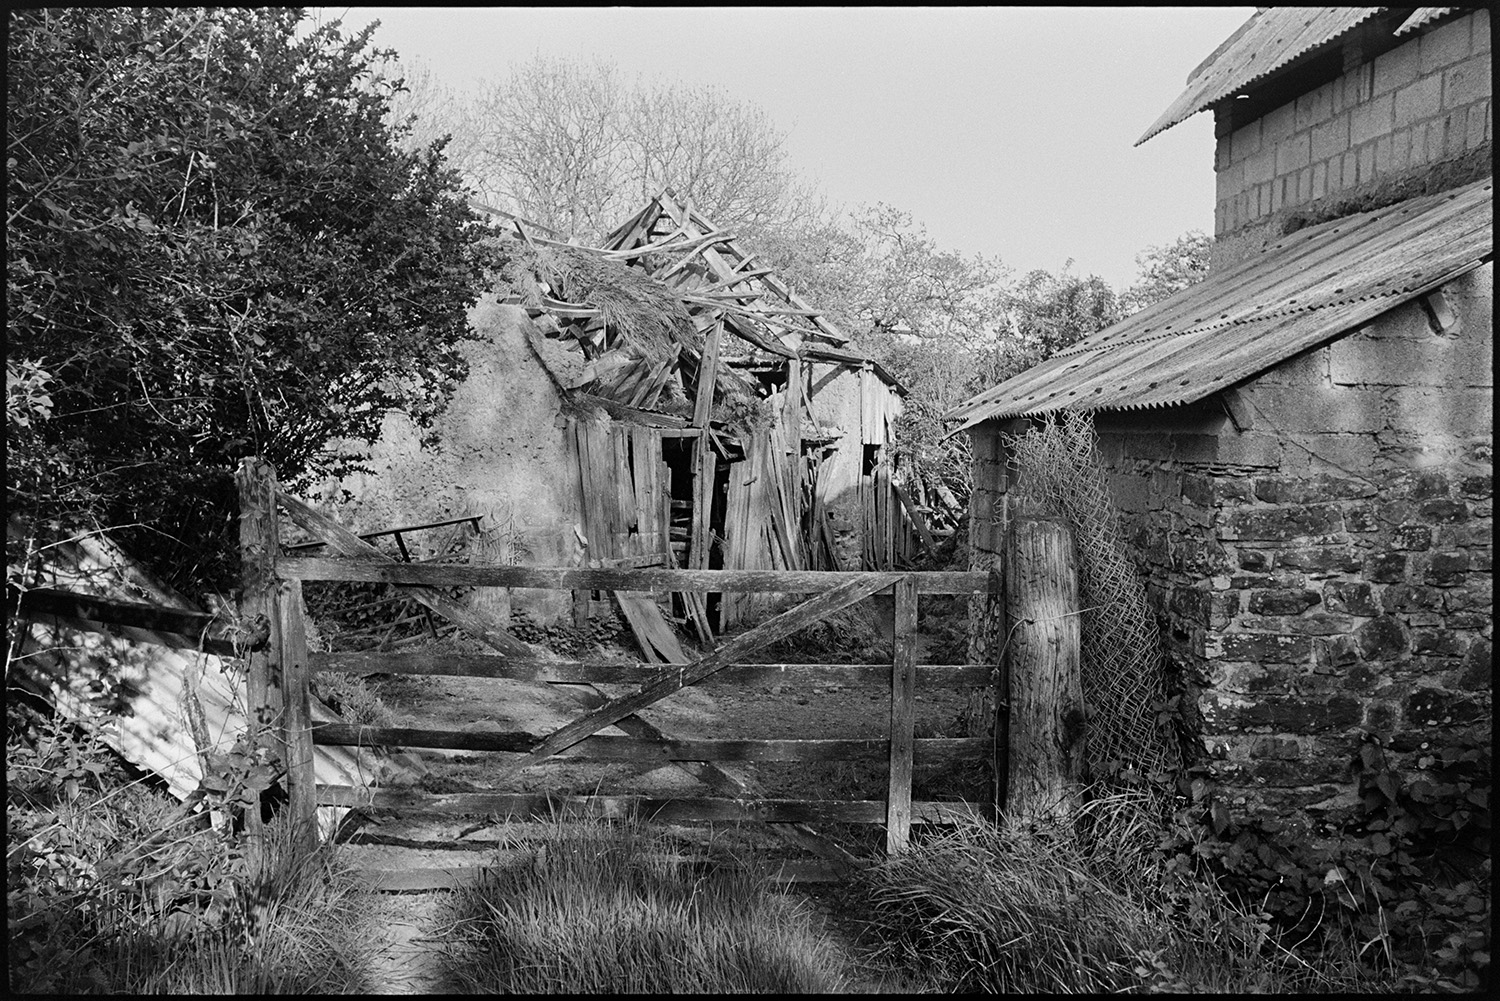 Ruined cob and thatch barn and old cob wall with ivy. Trailer loaded with rapeseed?
[A view through a wooden gateway of a collapsing wooden, cob and thatch barn on Reg Holland's farm at Newhouse, Ashreigney. Another barn can be seen in the foreground with a roll of chicken wire resting against the stone wall.]